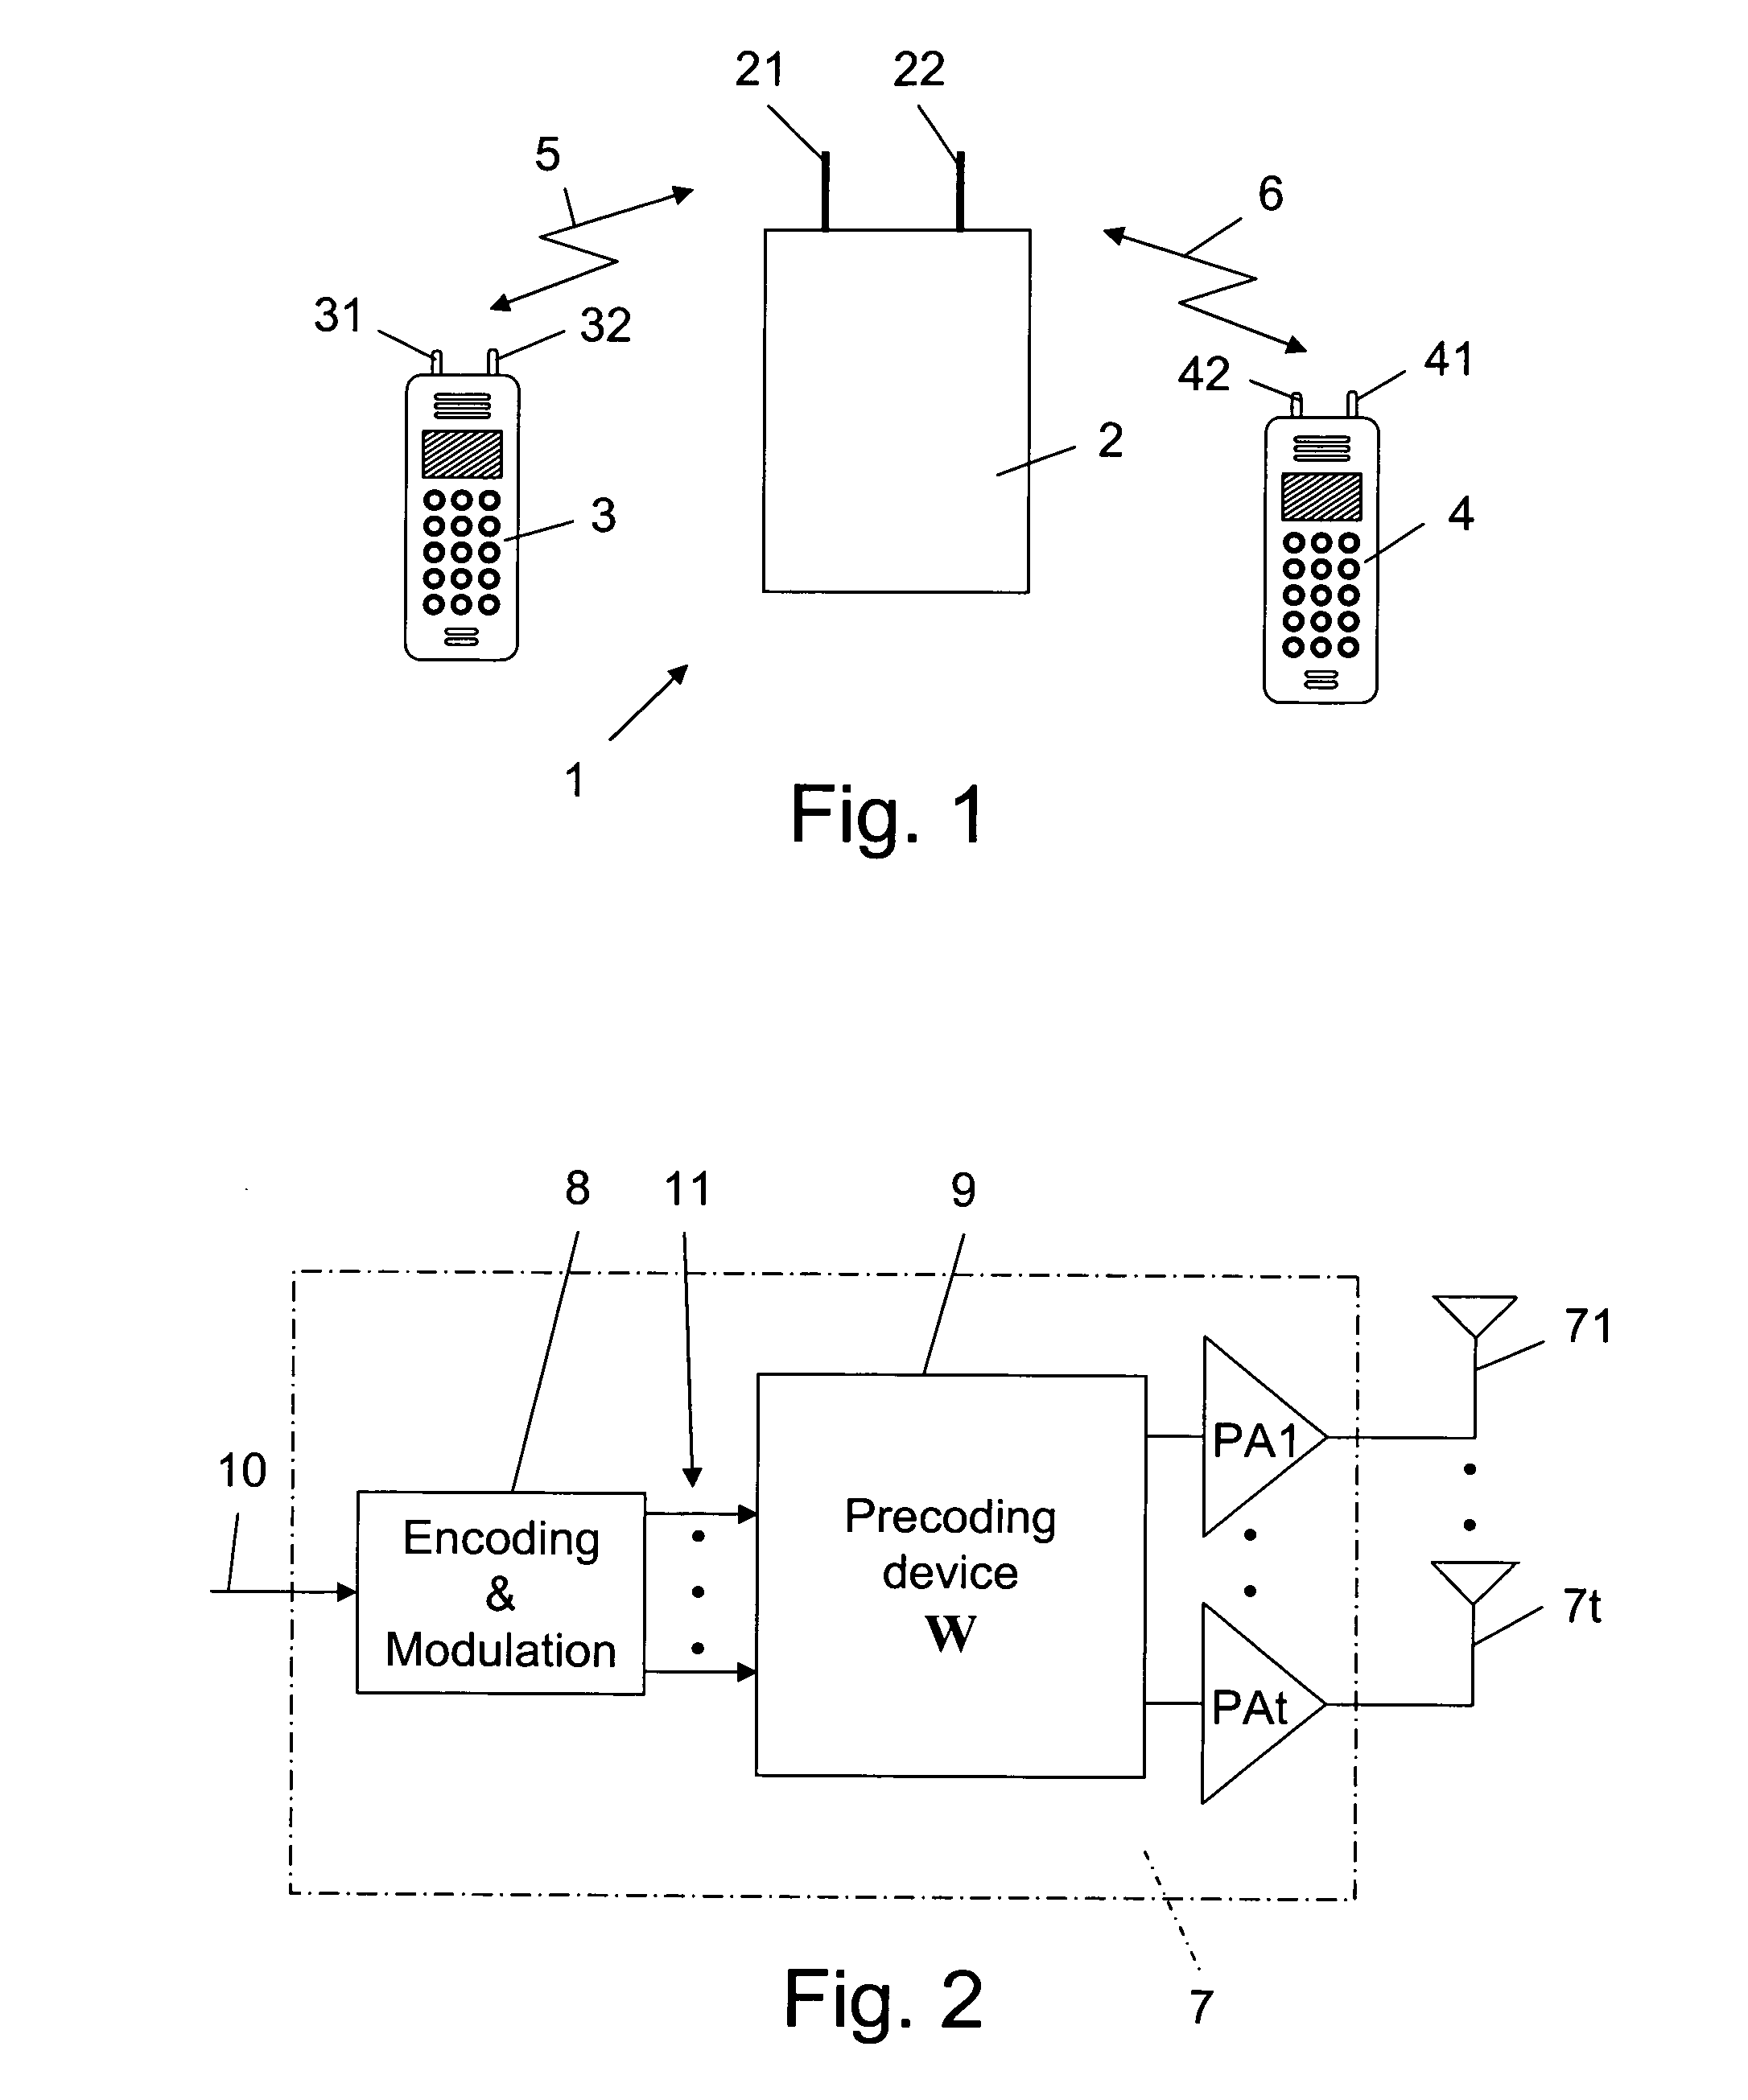 Method Of And A Device For Precoding Transmit Data Signals In A Wireless MIMO Communication System